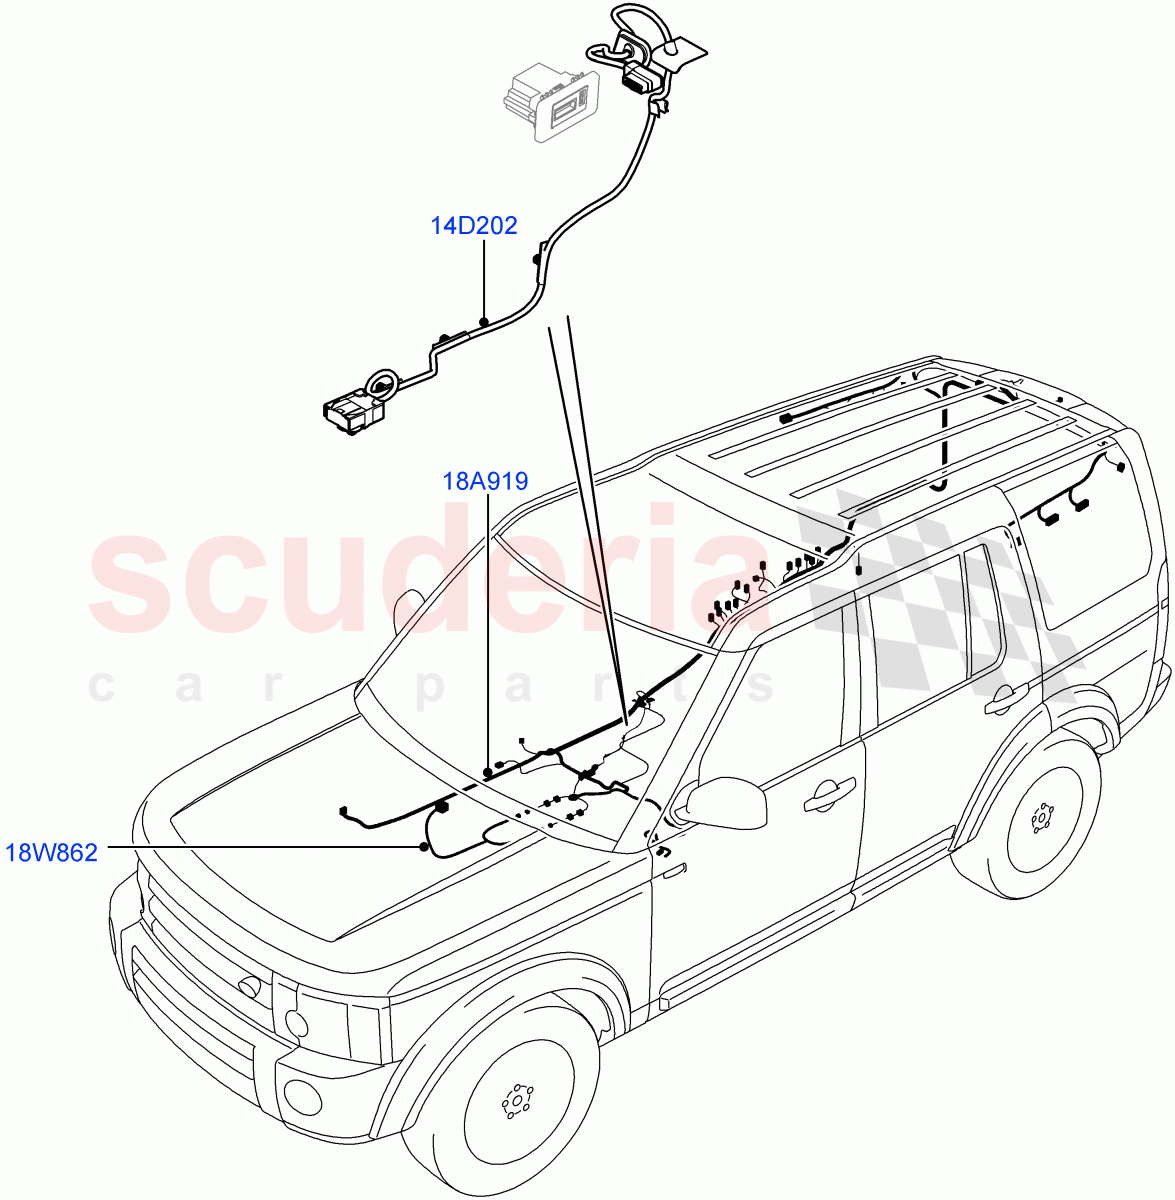 Electrical Wiring - Body And Rear(Audio/Navigation/Entertainment)((V)FROMAA000001,(V)TOAA999999) of Land Rover Land Rover Discovery 4 (2010-2016) [5.0 OHC SGDI NA V8 Petrol]